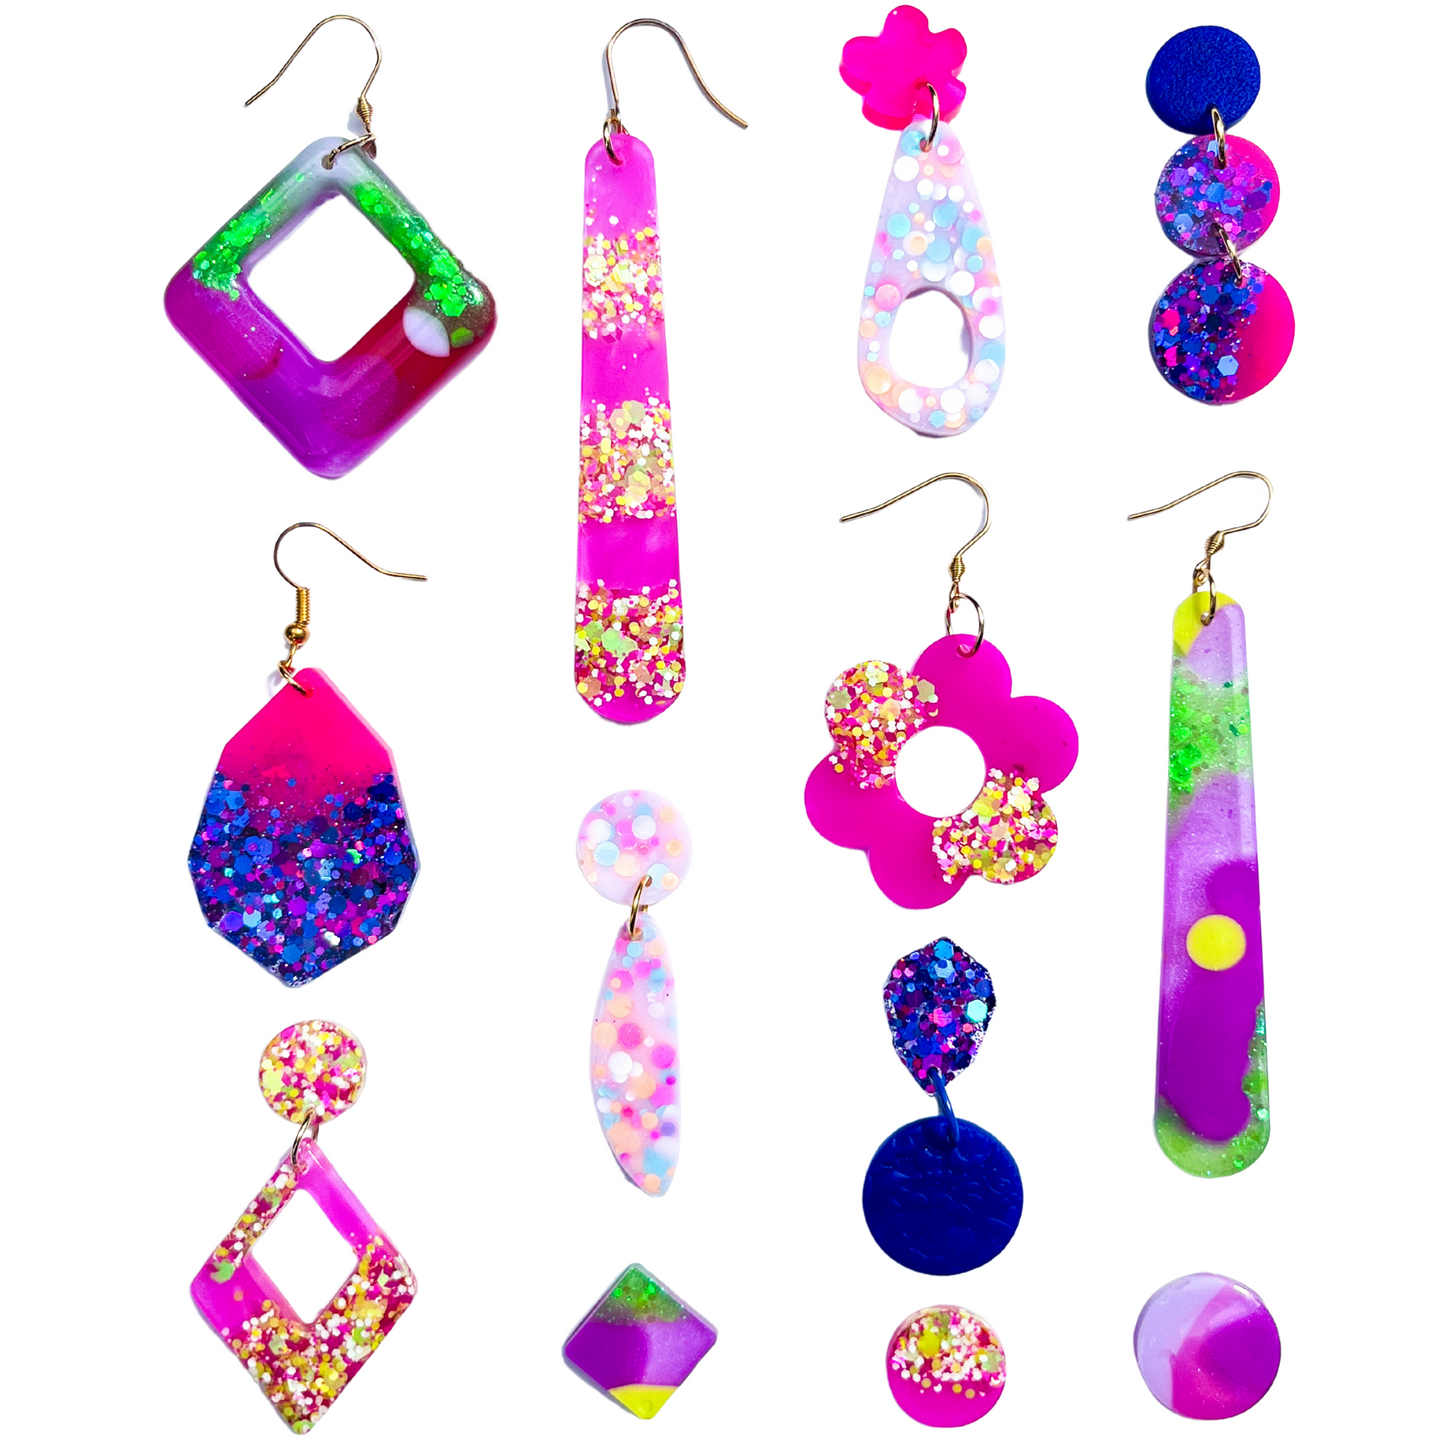 Colourful Statement glitter earrings handmade in NZ with hypoallergenic Titanium Hooks